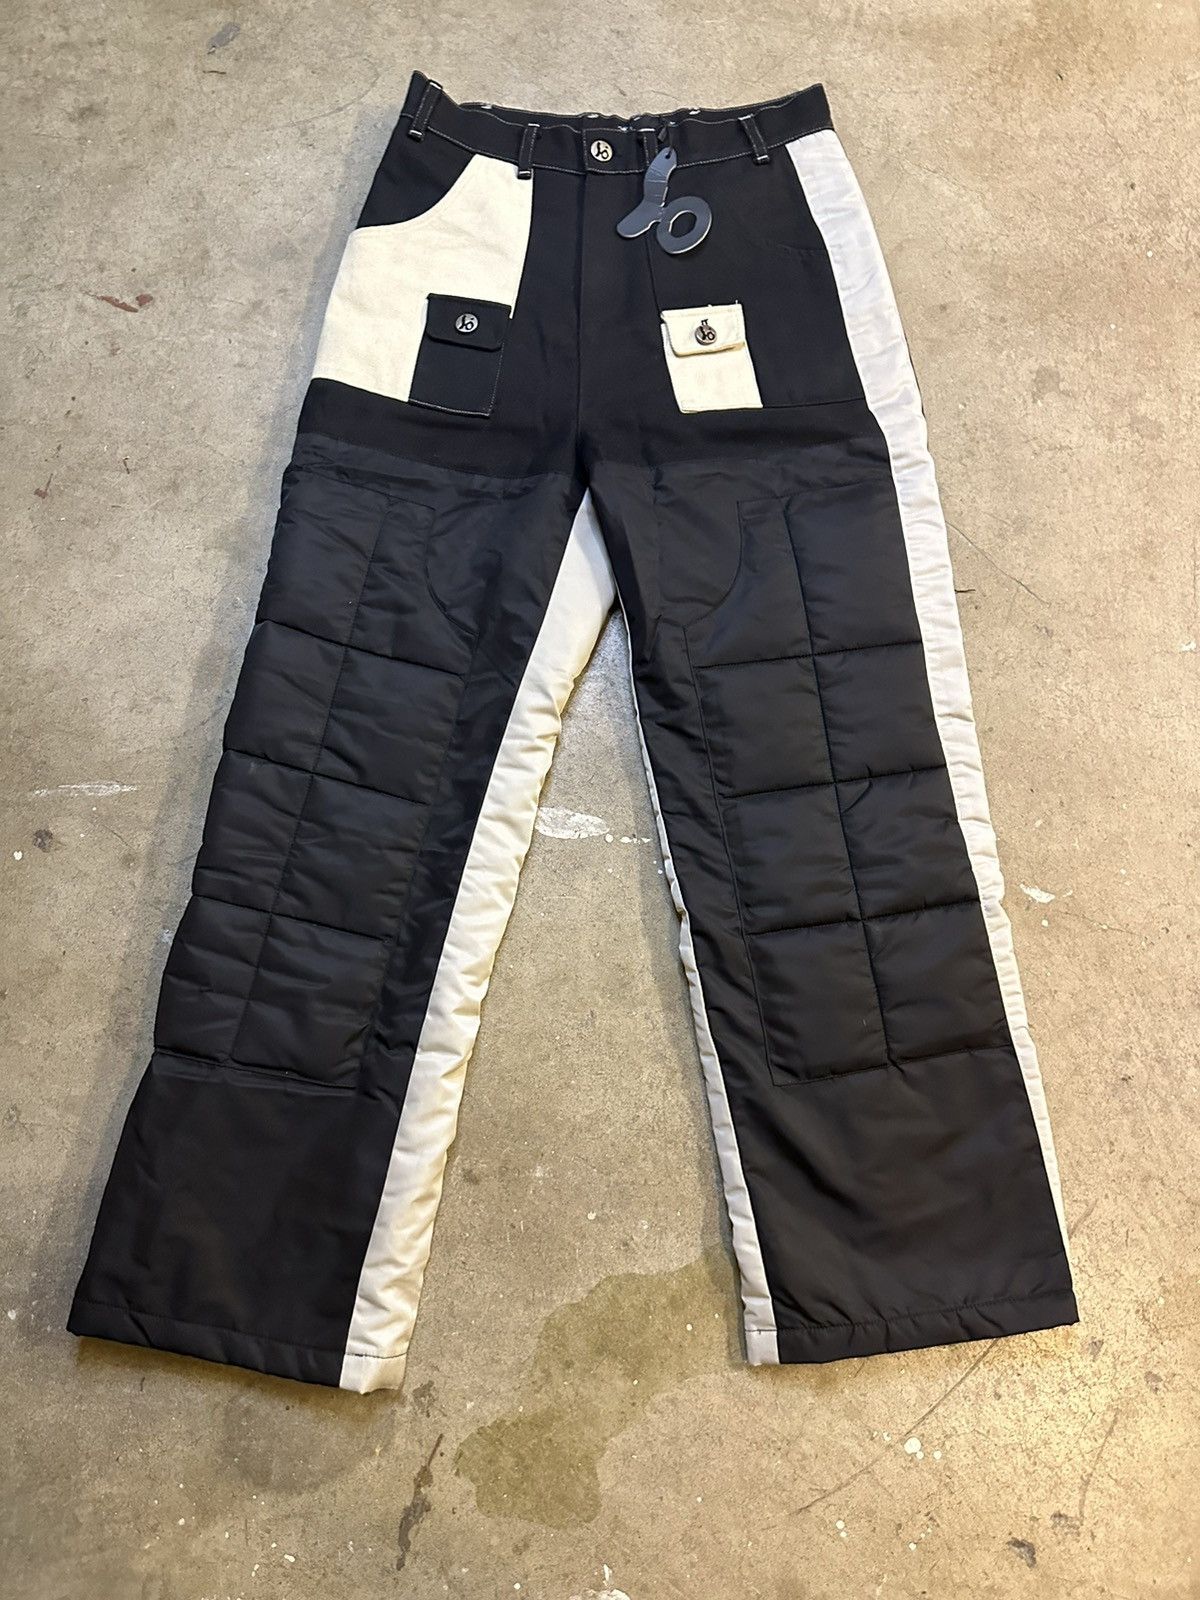 Bad Son Bad Son Woodland Overgrowth Brown Cargo Pants | Grailed